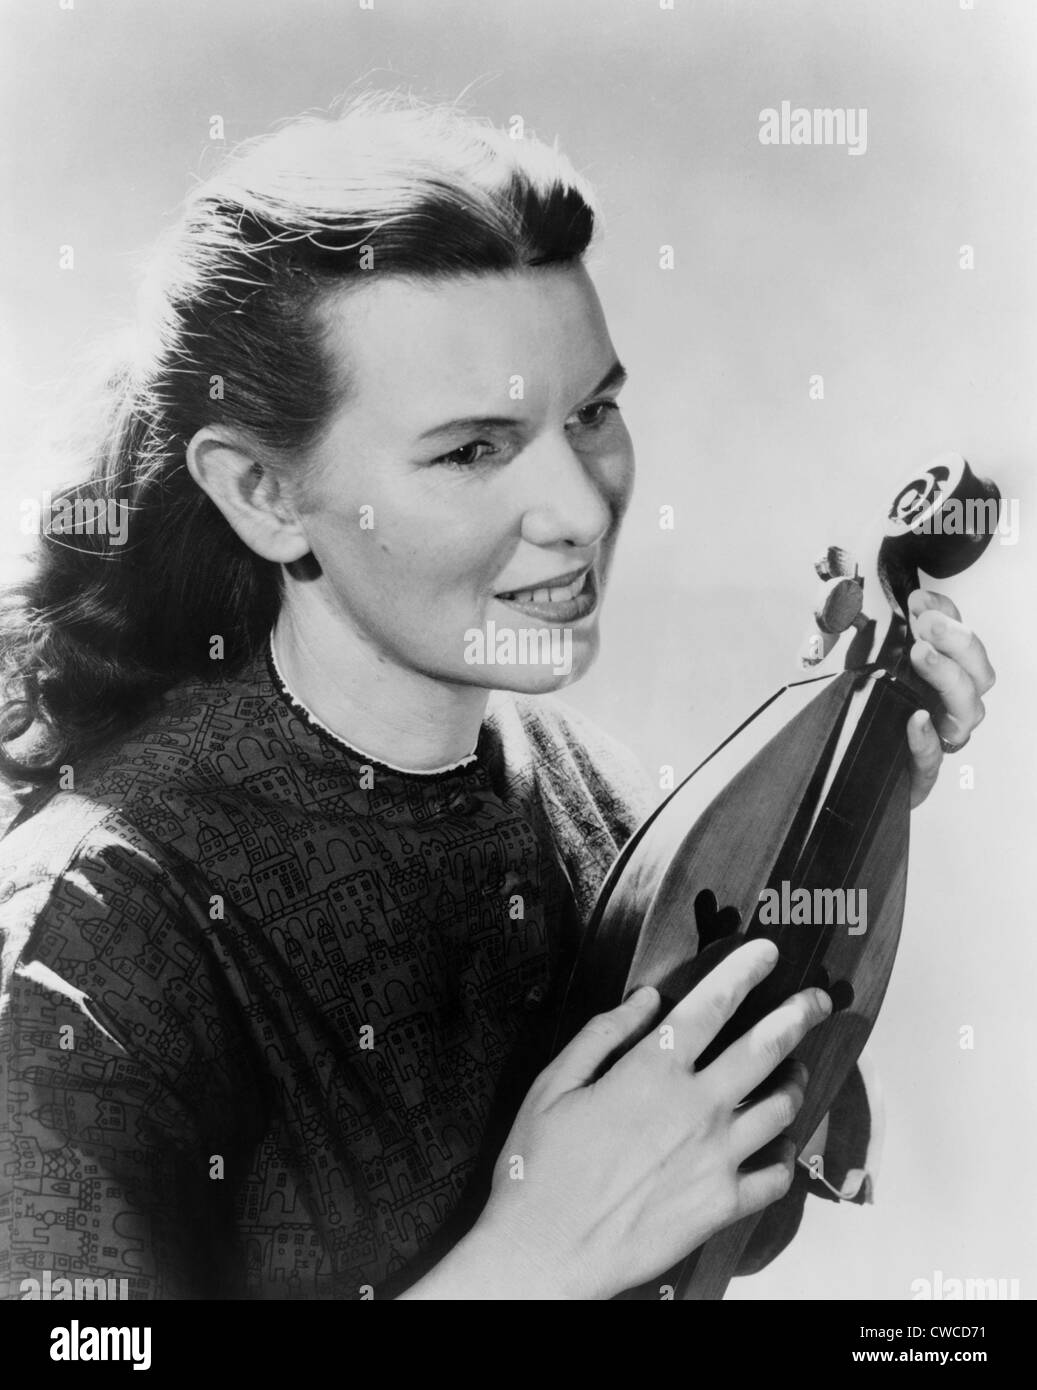 Folk singer, Jean Ritchie, holding an Appalachian dulcimer, an instrument she popularized in the 1950's and 1960's. Stock Photo